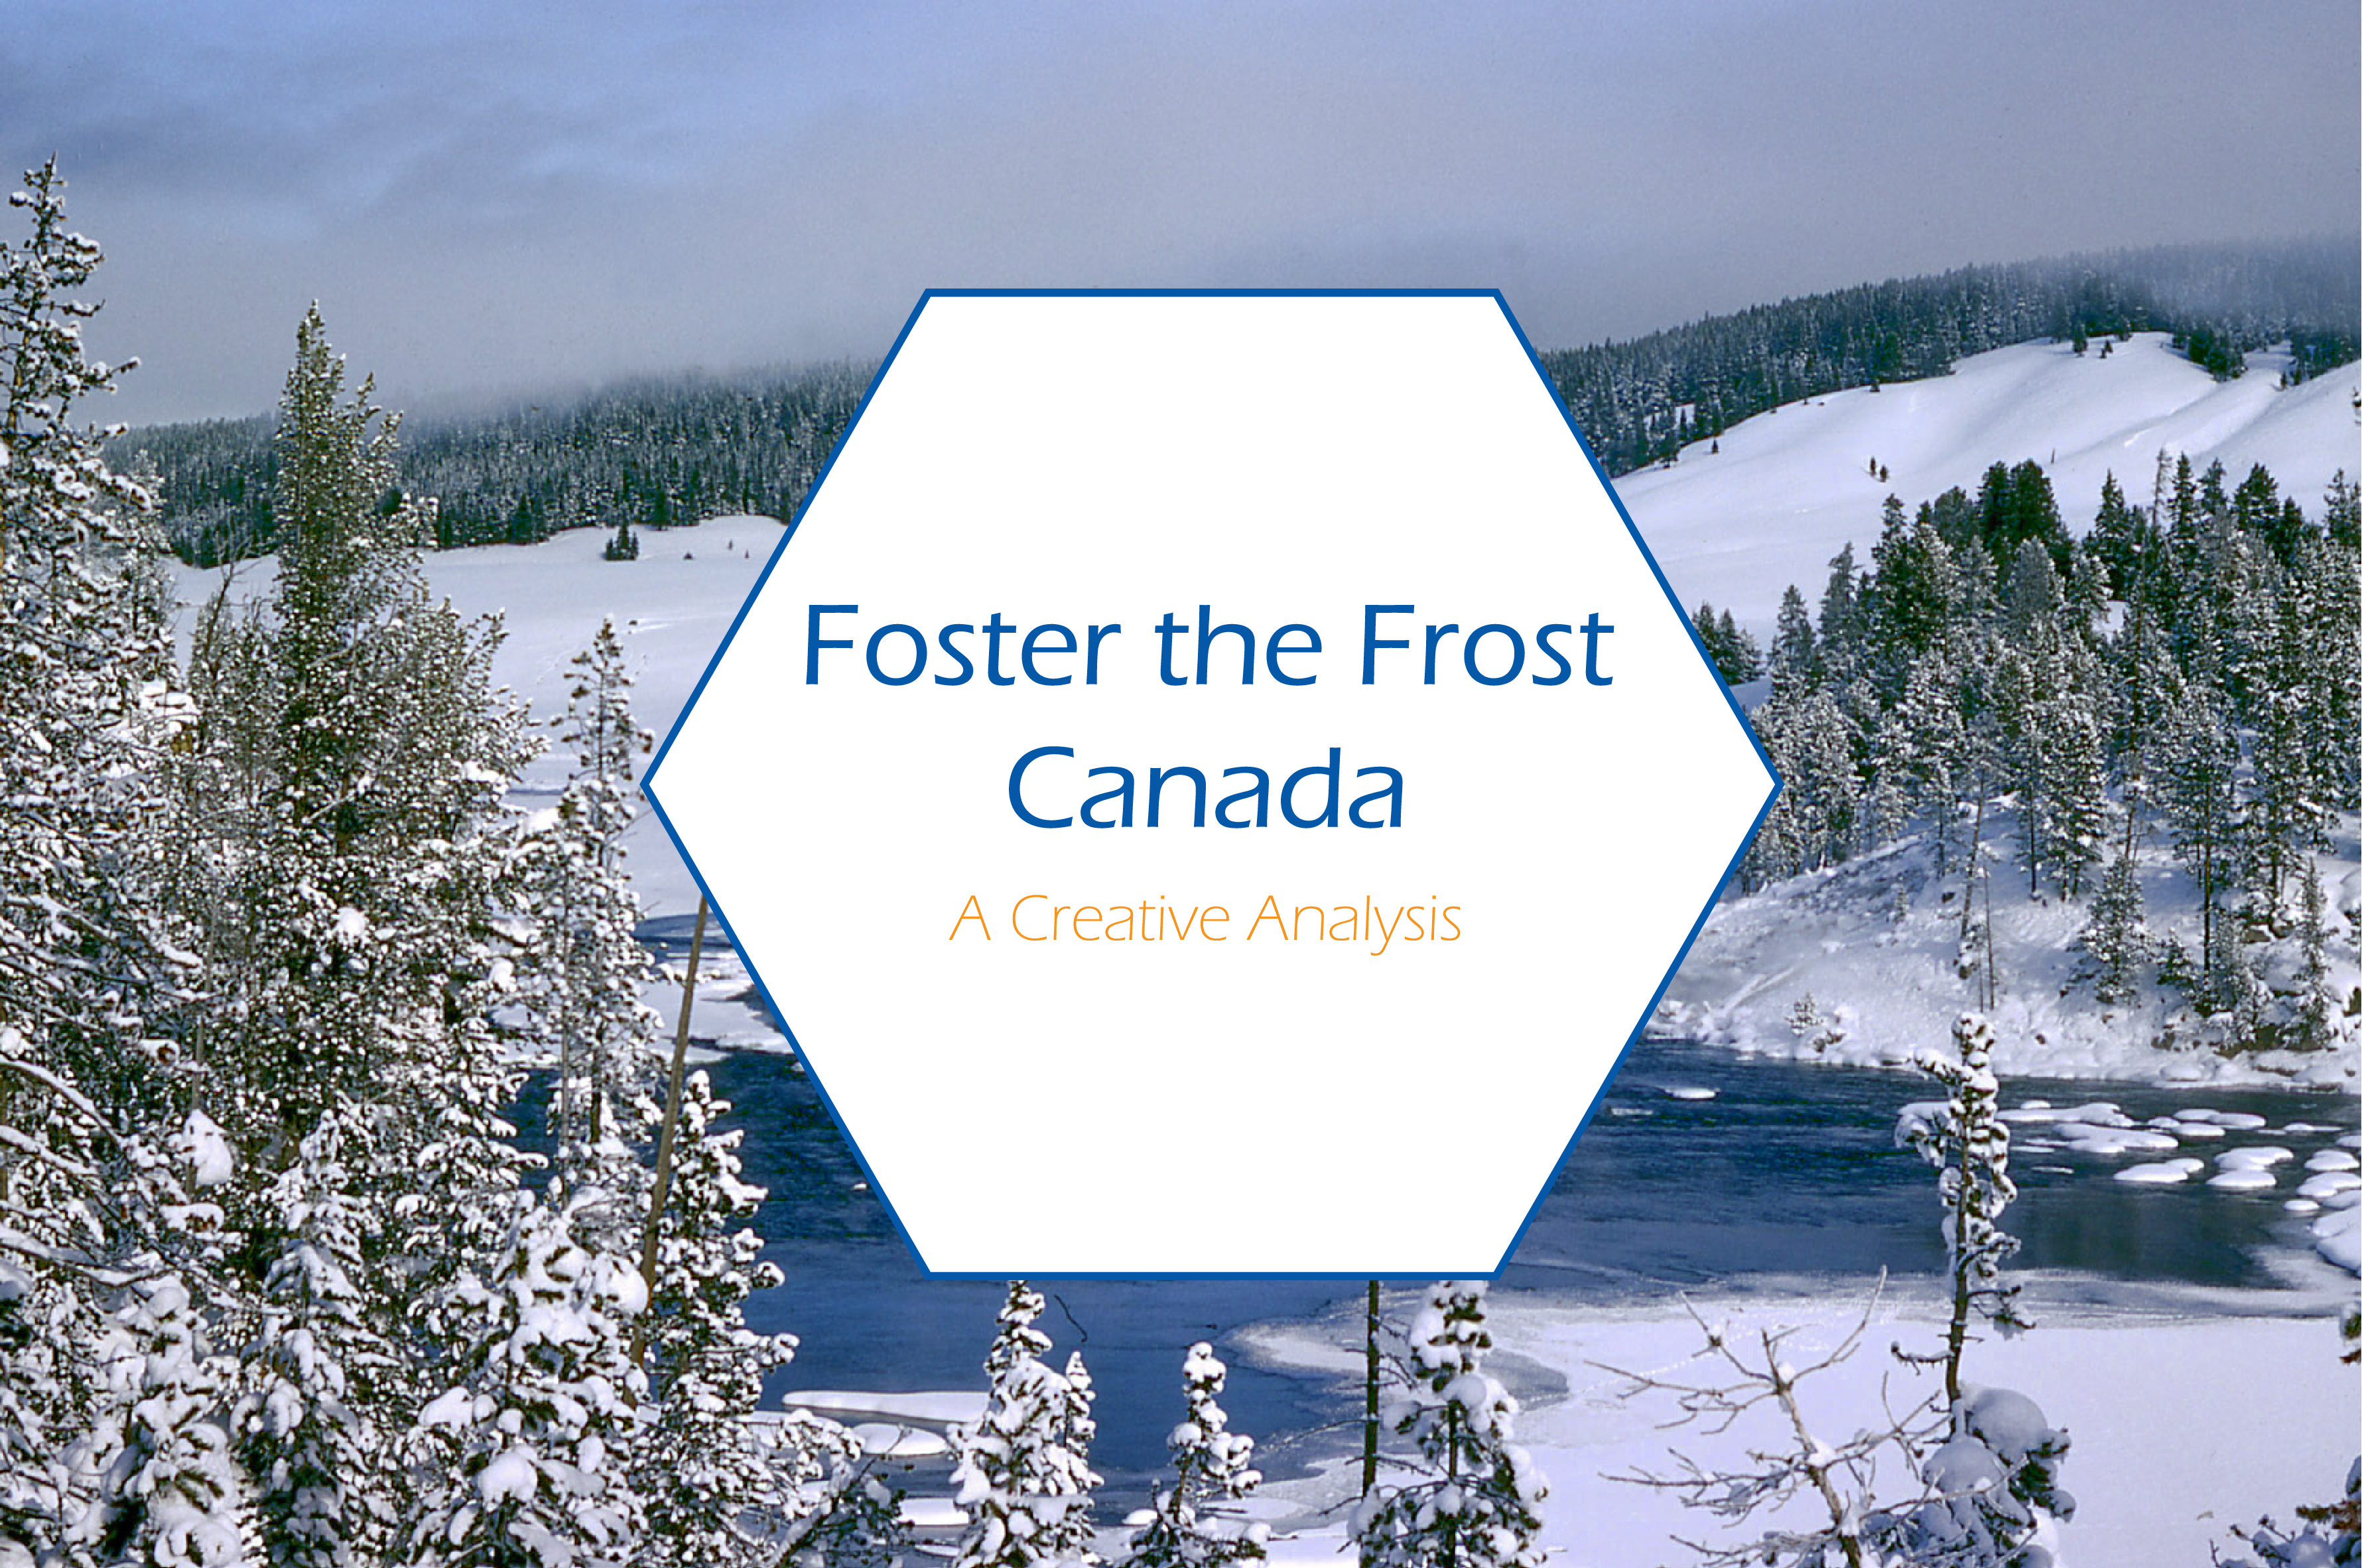 Title Page for the Foster the Frost Presentation.